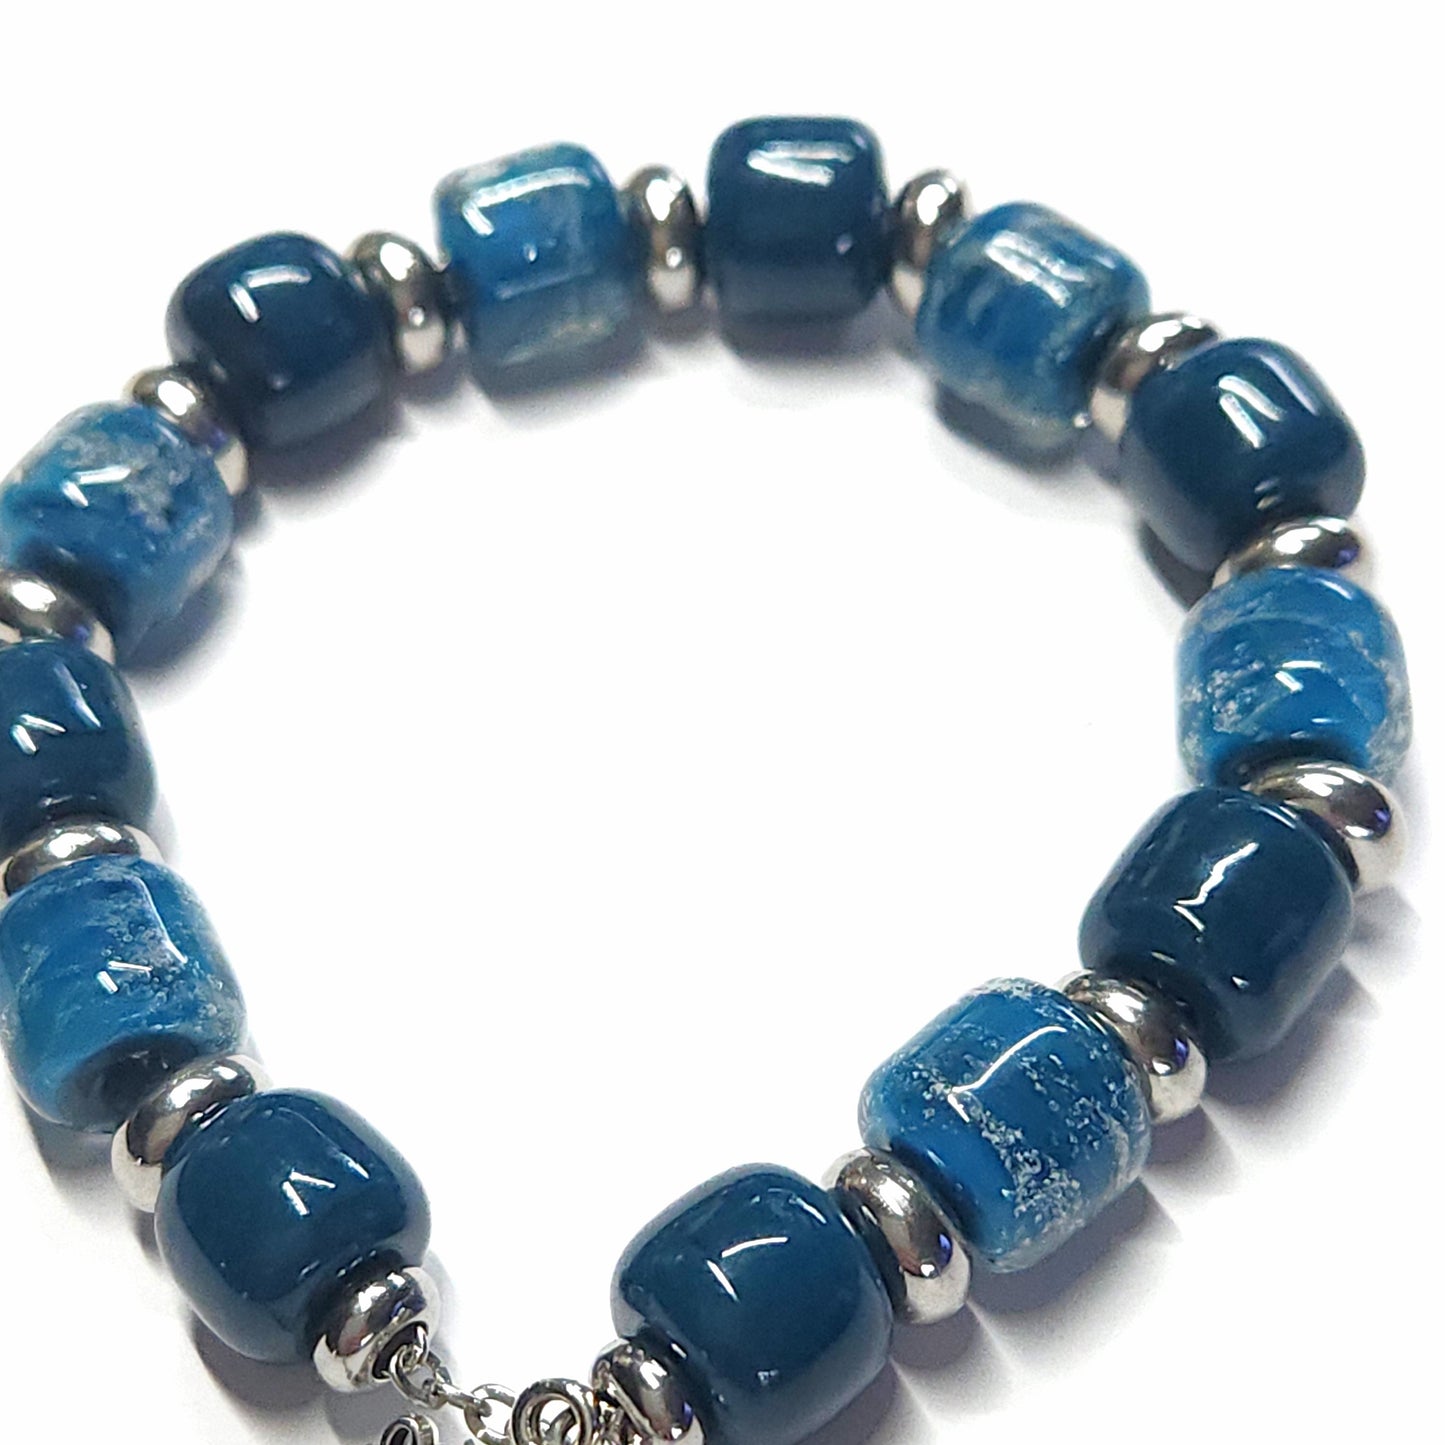 Eternal Cremation Bracelet With 6 Ash Beads - Silver